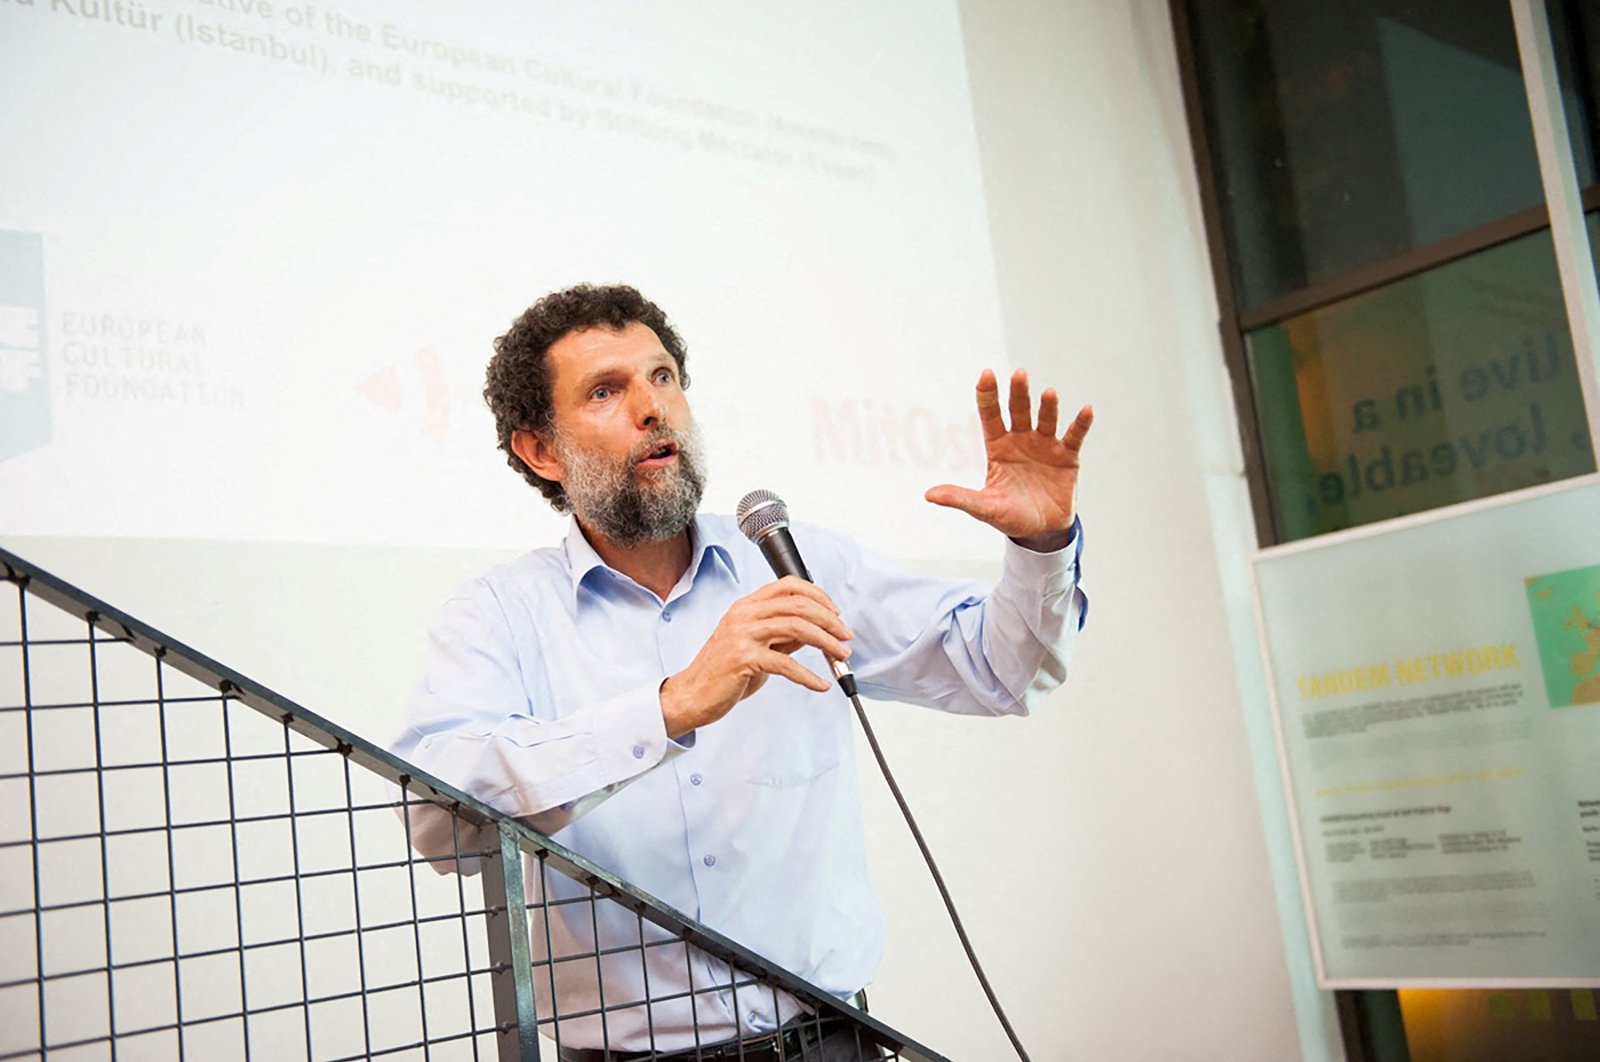 Turkish businessperson Osman Kavala speaks during an event in this undated handout photo. (Reuters Photo)